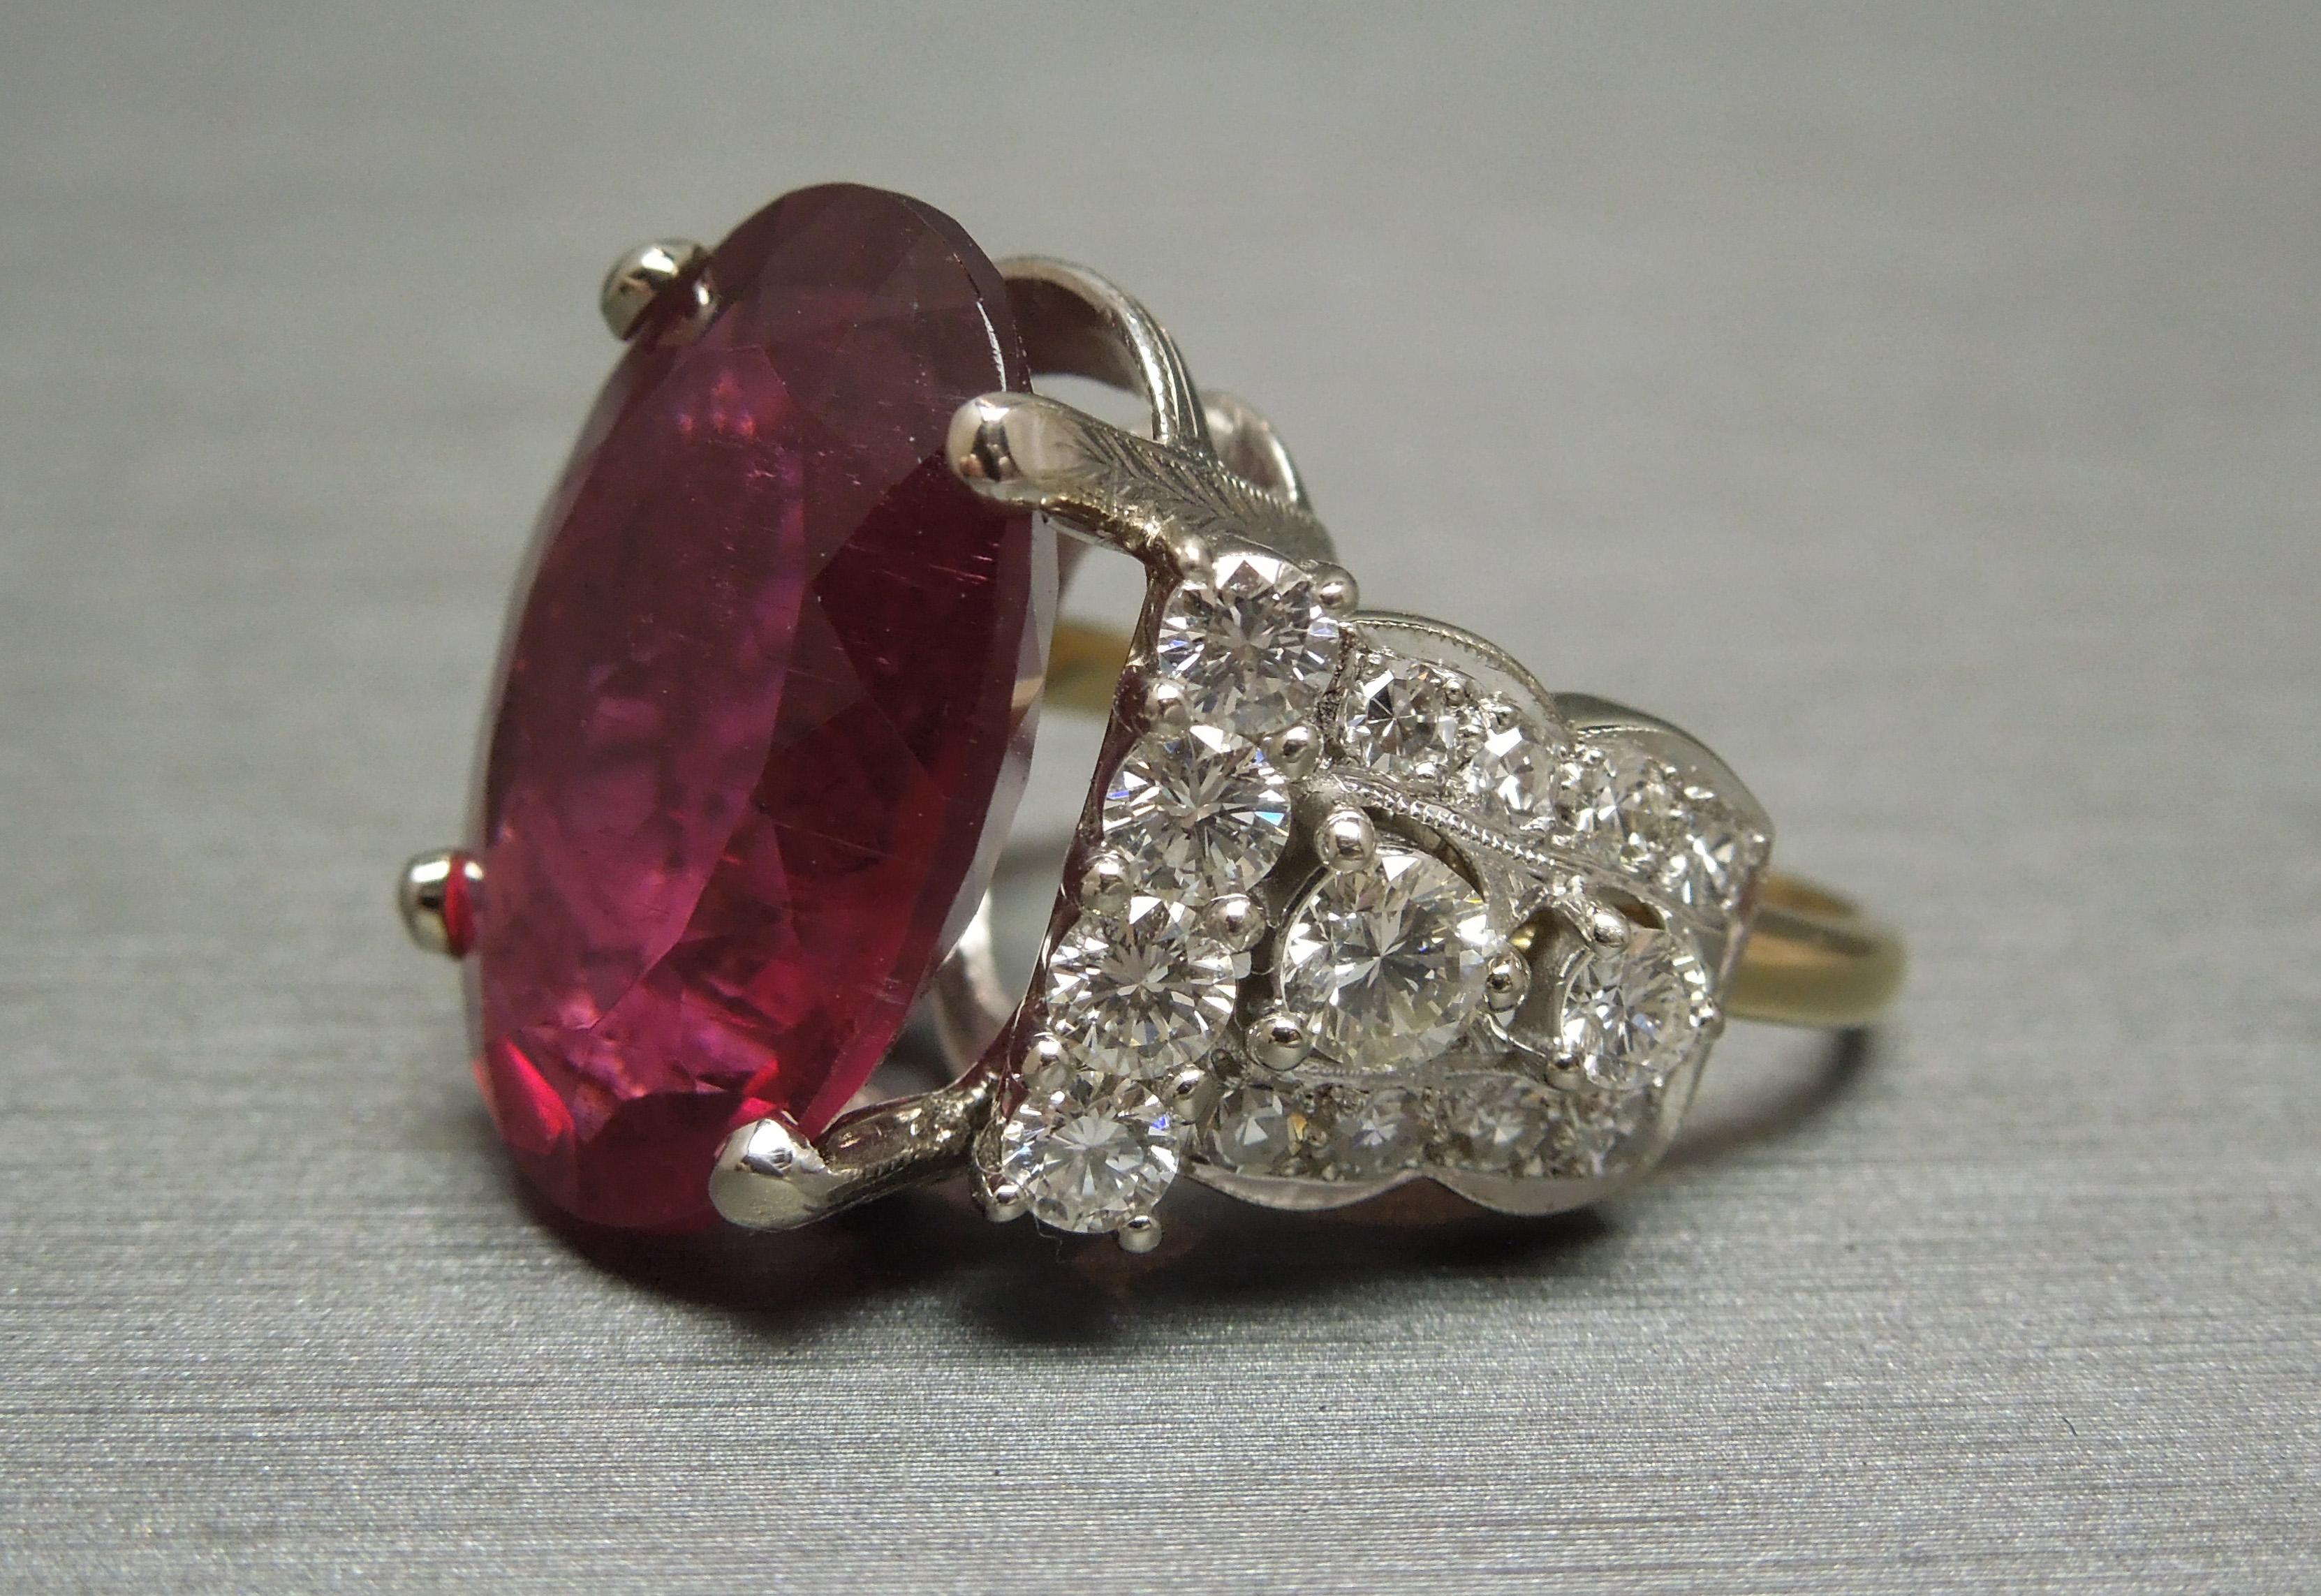 This Rubellite & Deco Diamond Ring features a central Brilliant Oval cut 13.84 carat GIA Certified Rubellite, a.k.a. Red Tourmaline, securely set in a 4-prong setting. Each prong accented with a Hand Engraved detailing as well. A vivid Red with deep